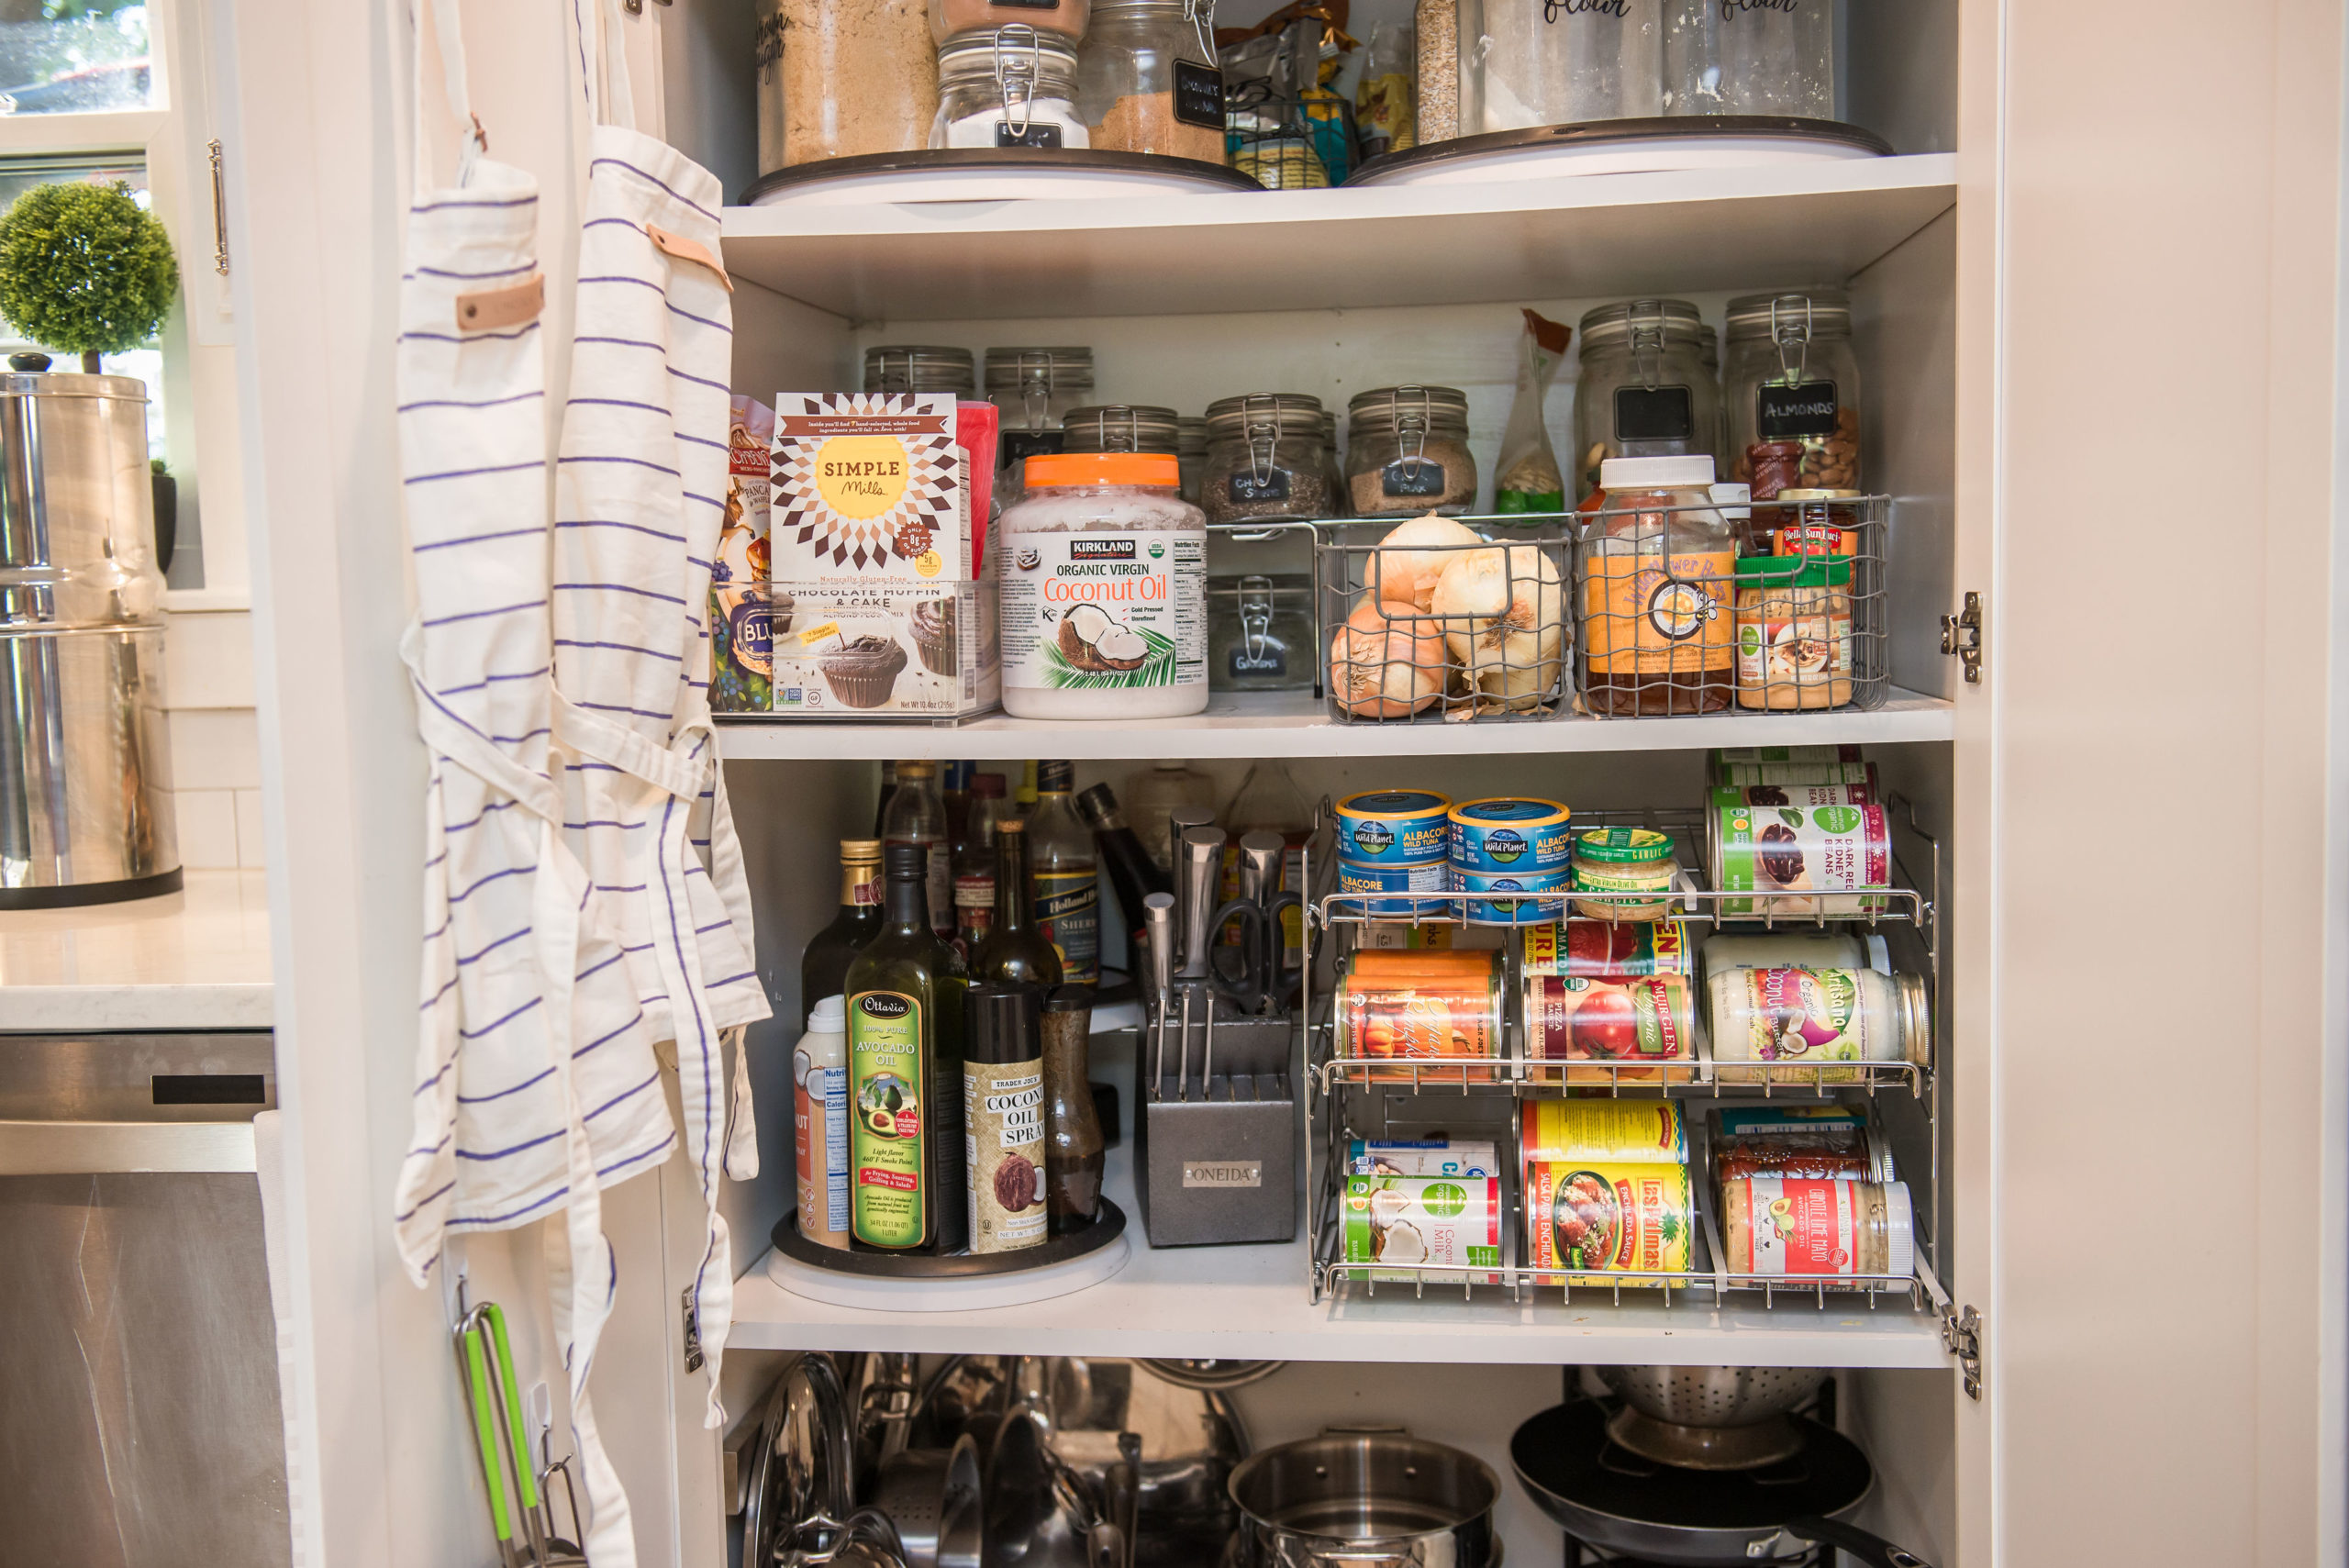 HOW TO ORGANIZE YOUR PANTRY IN 5 EASY STEPS 